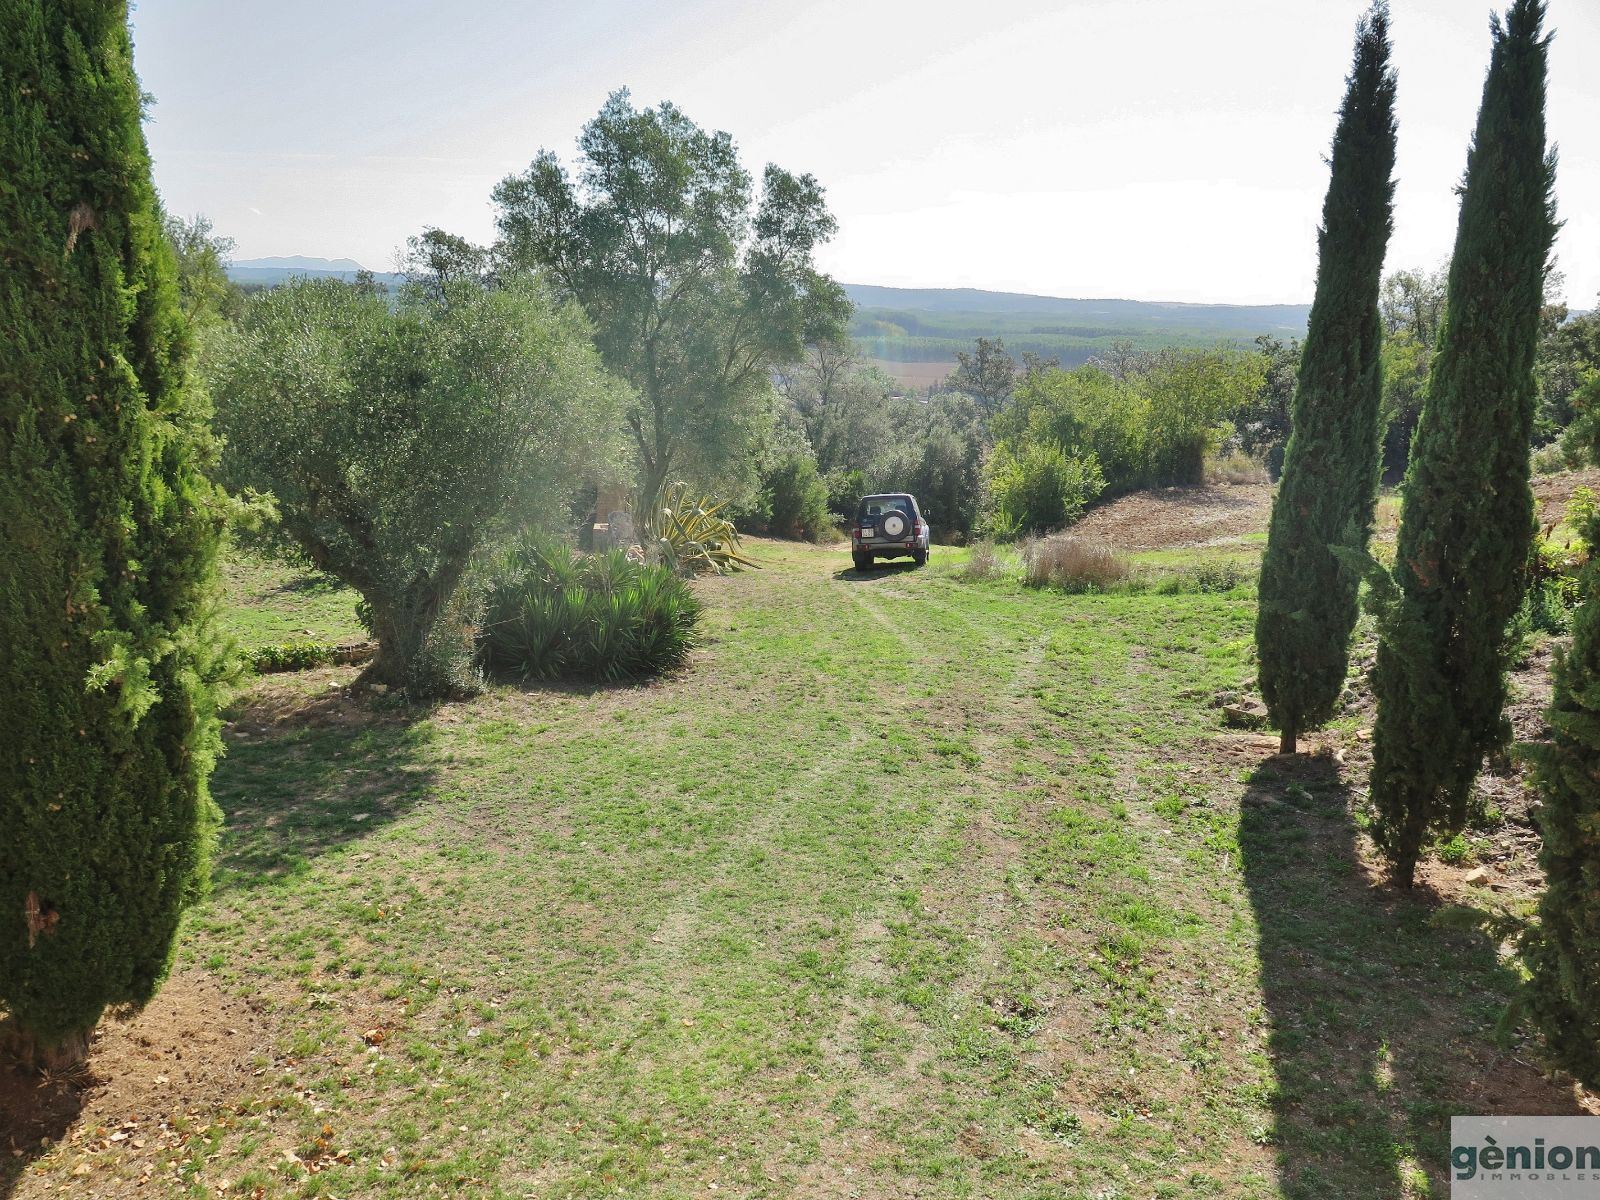 AUTHENTIC TRADITIONAL CATALAN FARMHOUSE: 600M² BUILT AREA AND 16 Ha OF GROUNDS, WITH VIEWS OVER THE EMPORDÀ PLAIN